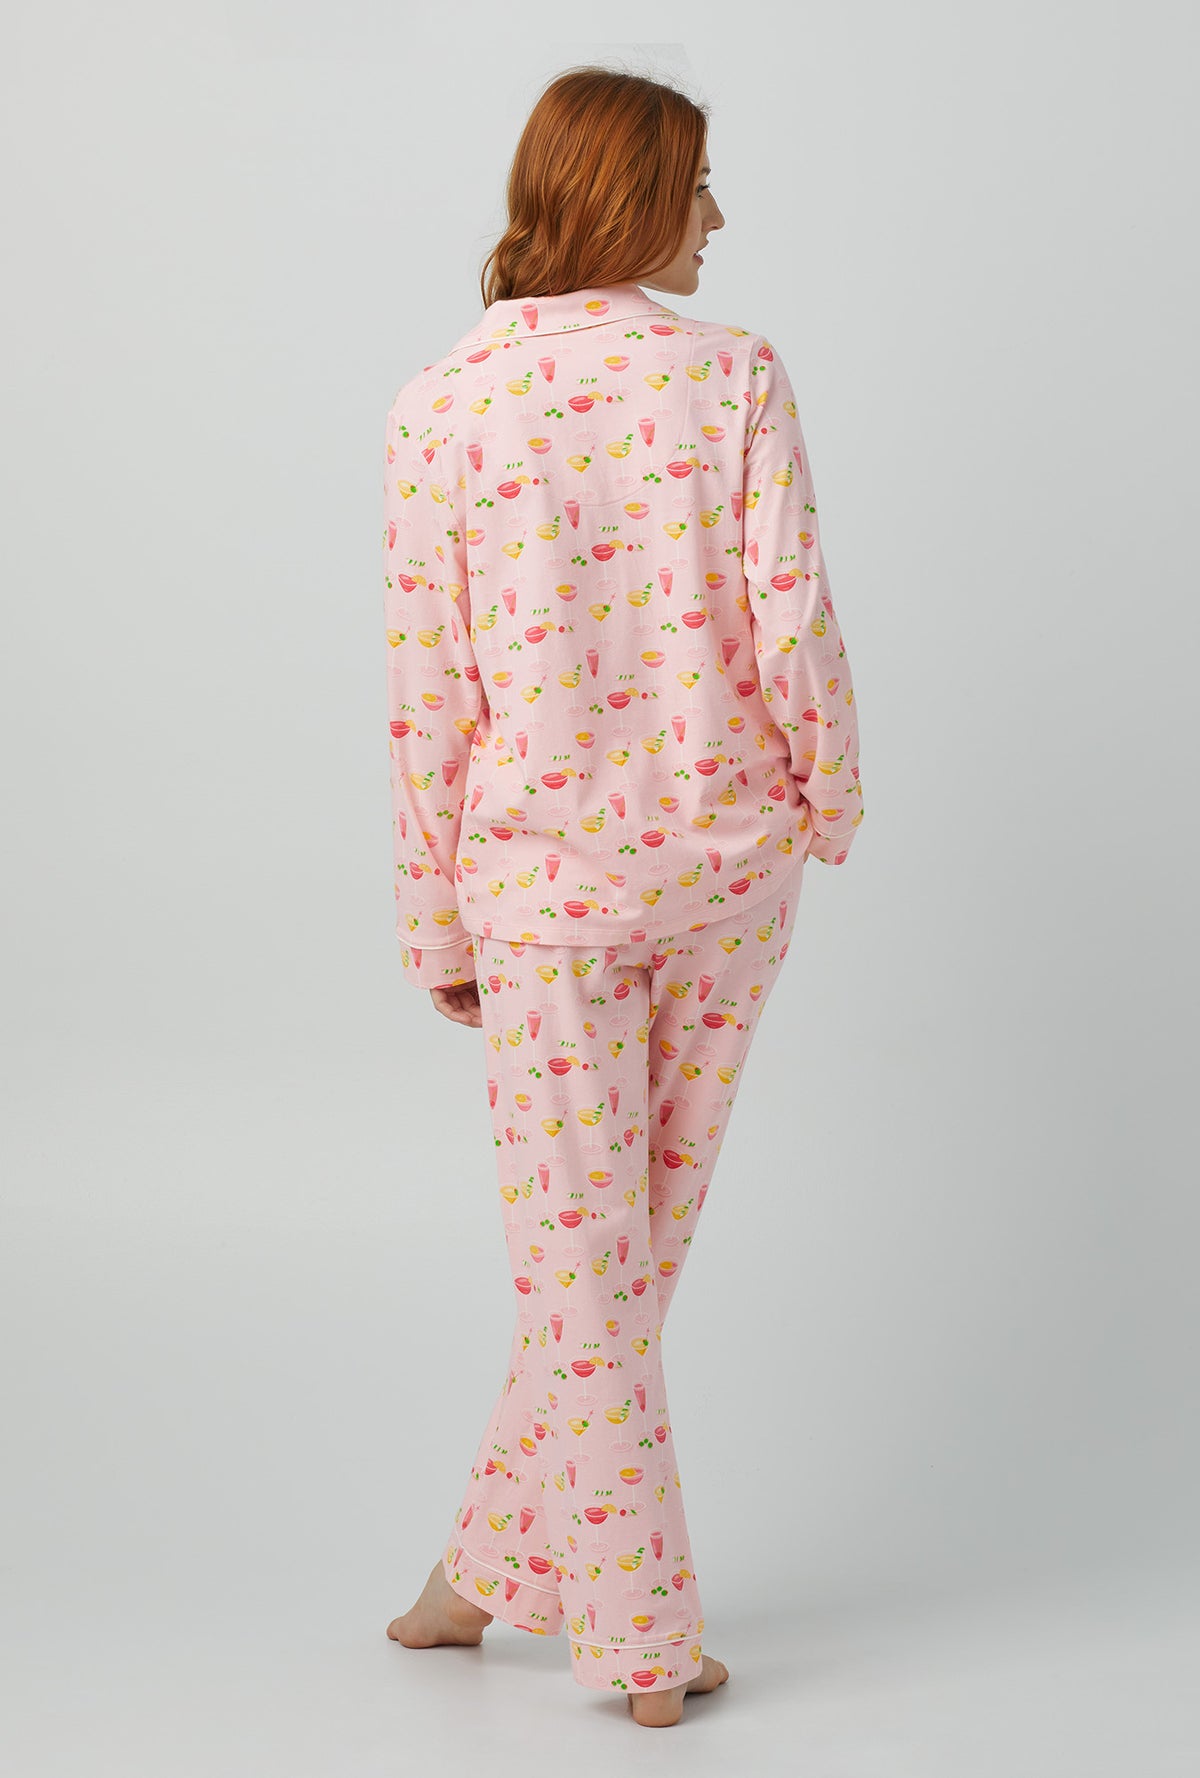 A lady wearing pink Long Sleeve Classic Stretch Jersey PJ Set with Pink Mixology print